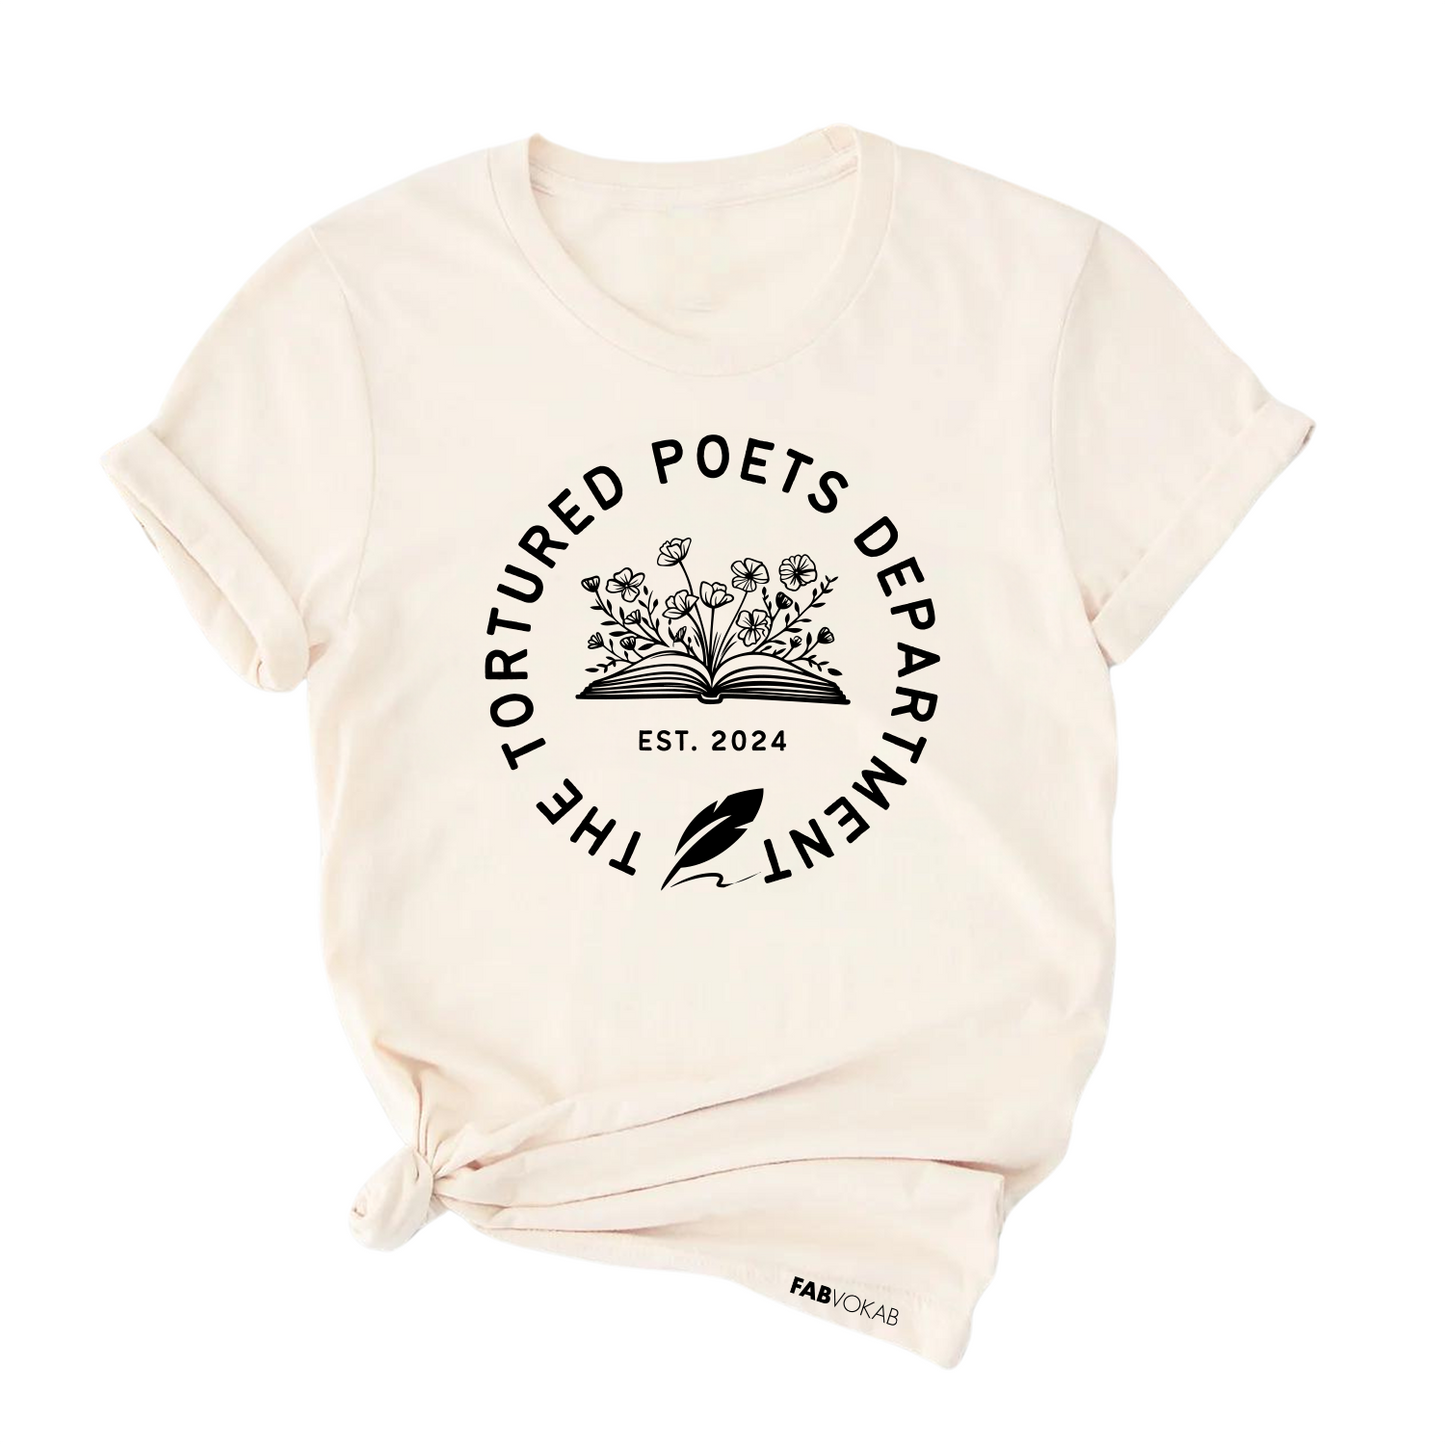 The Tortured Poets Department Inspired Girls' T-shirt: A Tribute to Taylor Swift's 2024 Album